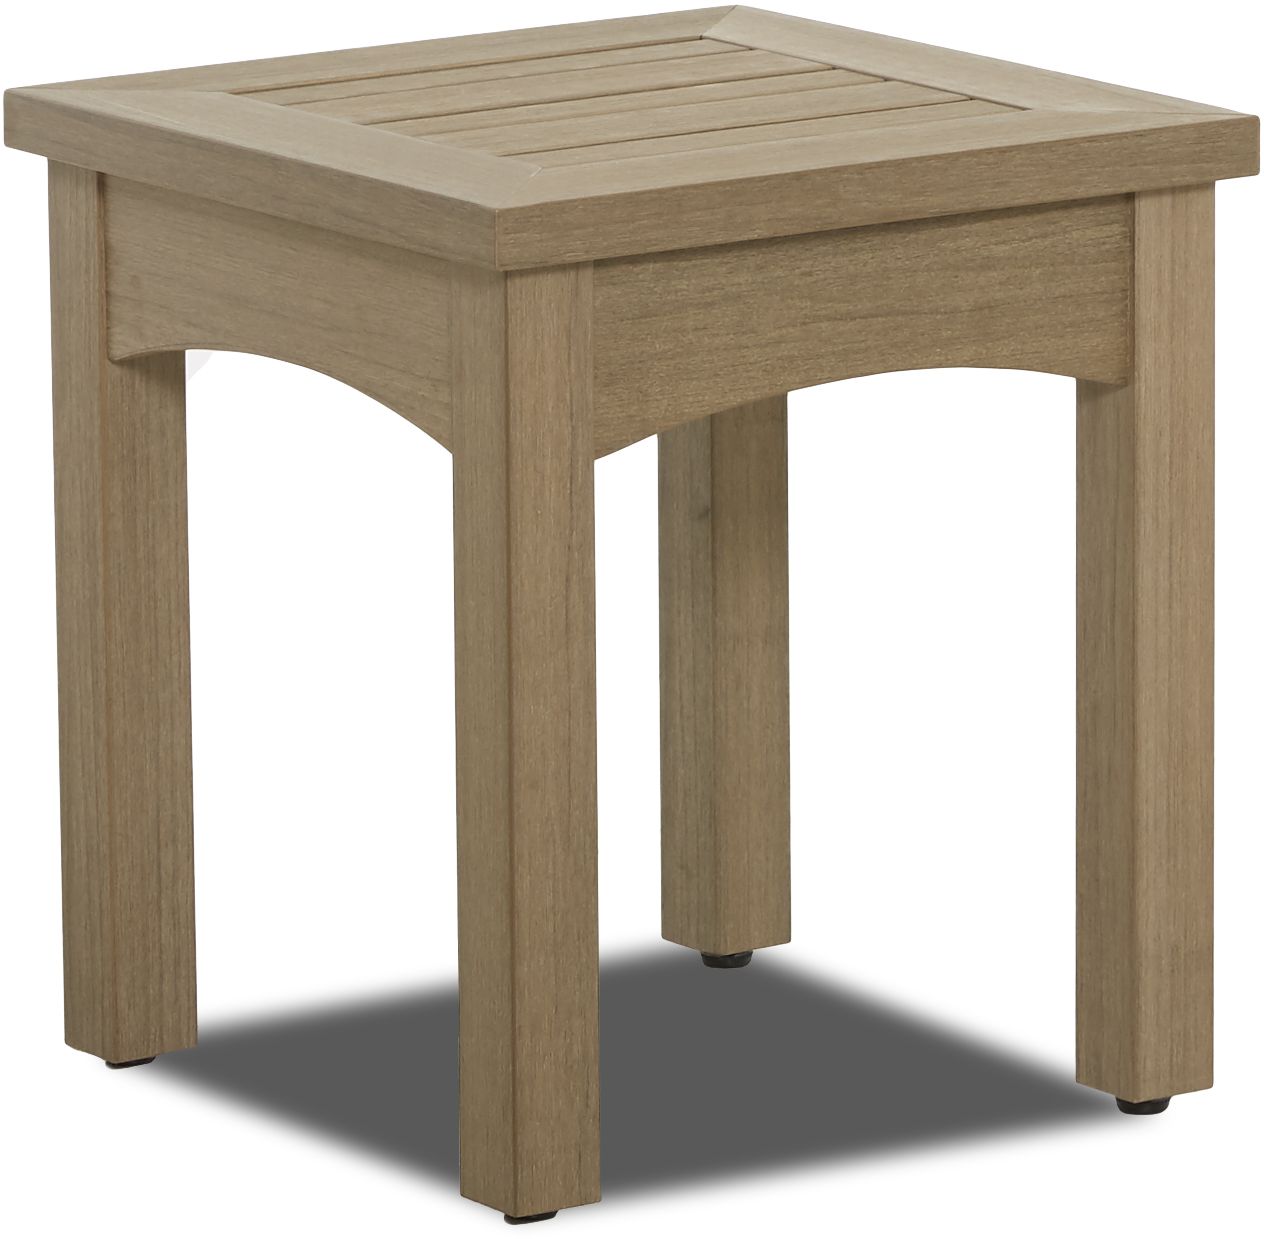 Klaussner® Outdoor Delray Square Accent Table